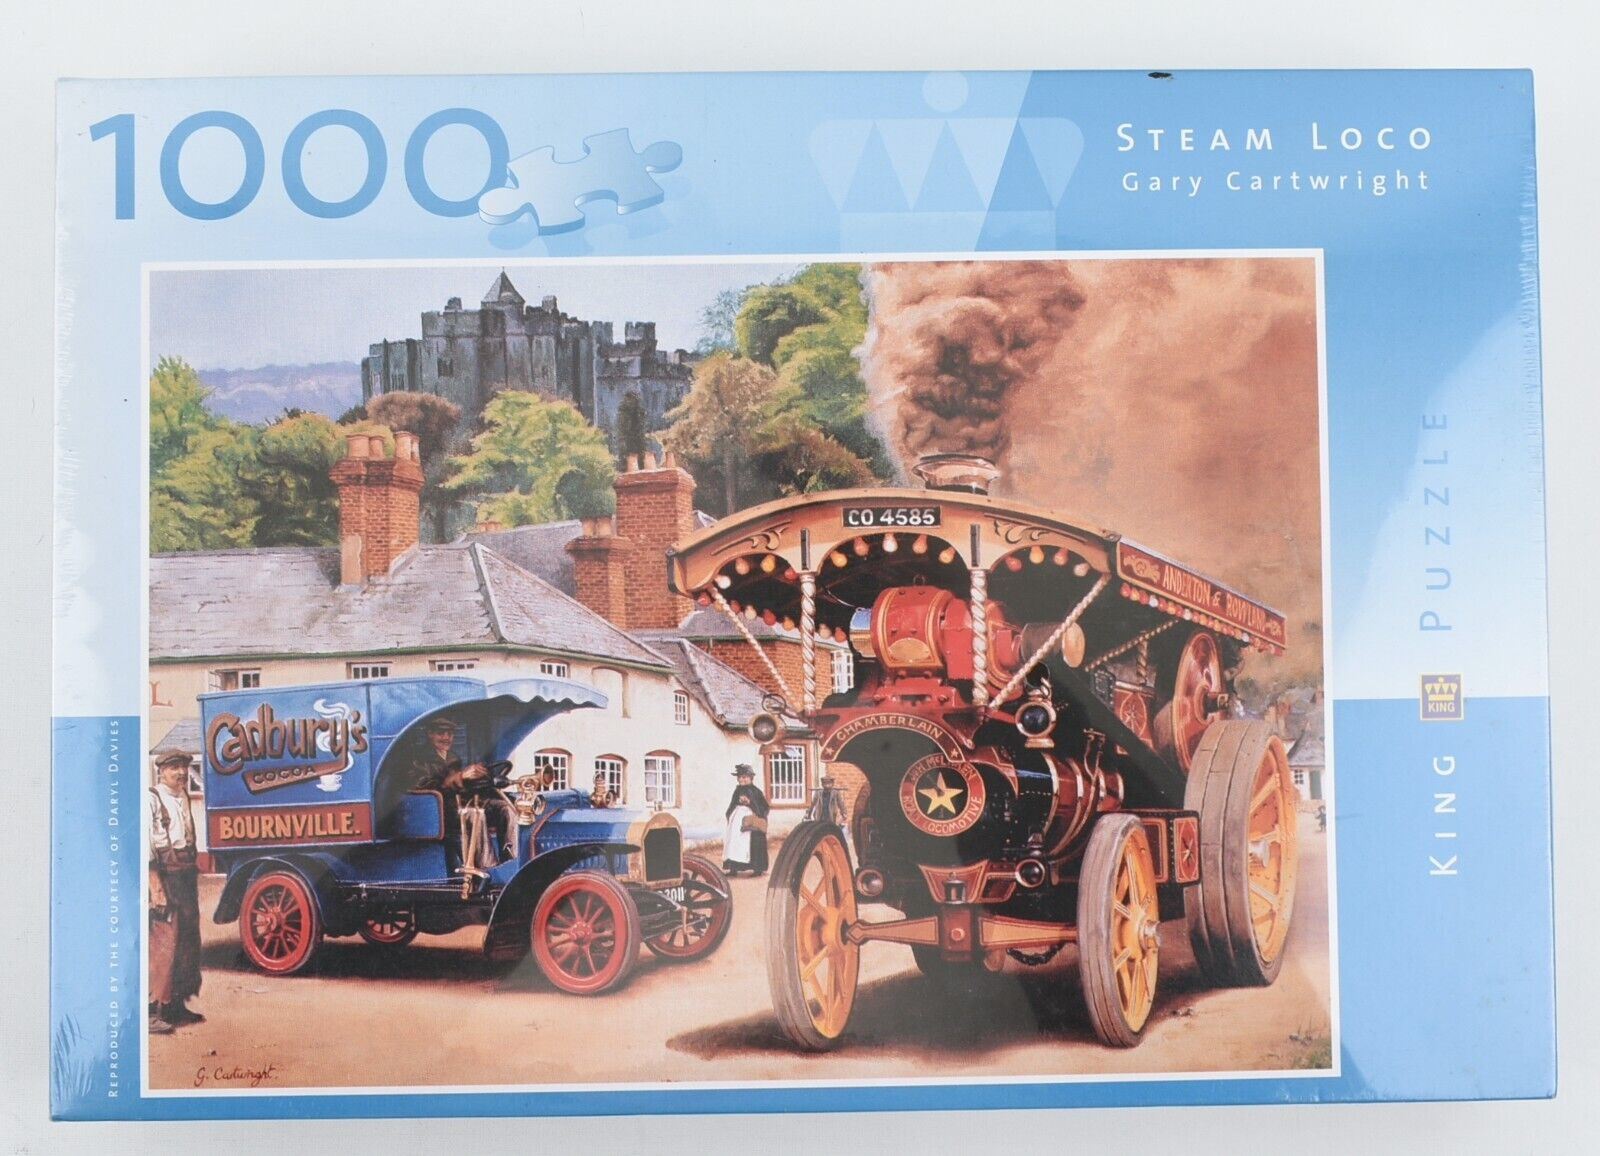 KING Steam Loco (by Gary Cartwright) 1000pcs Jigsaw Puzzle